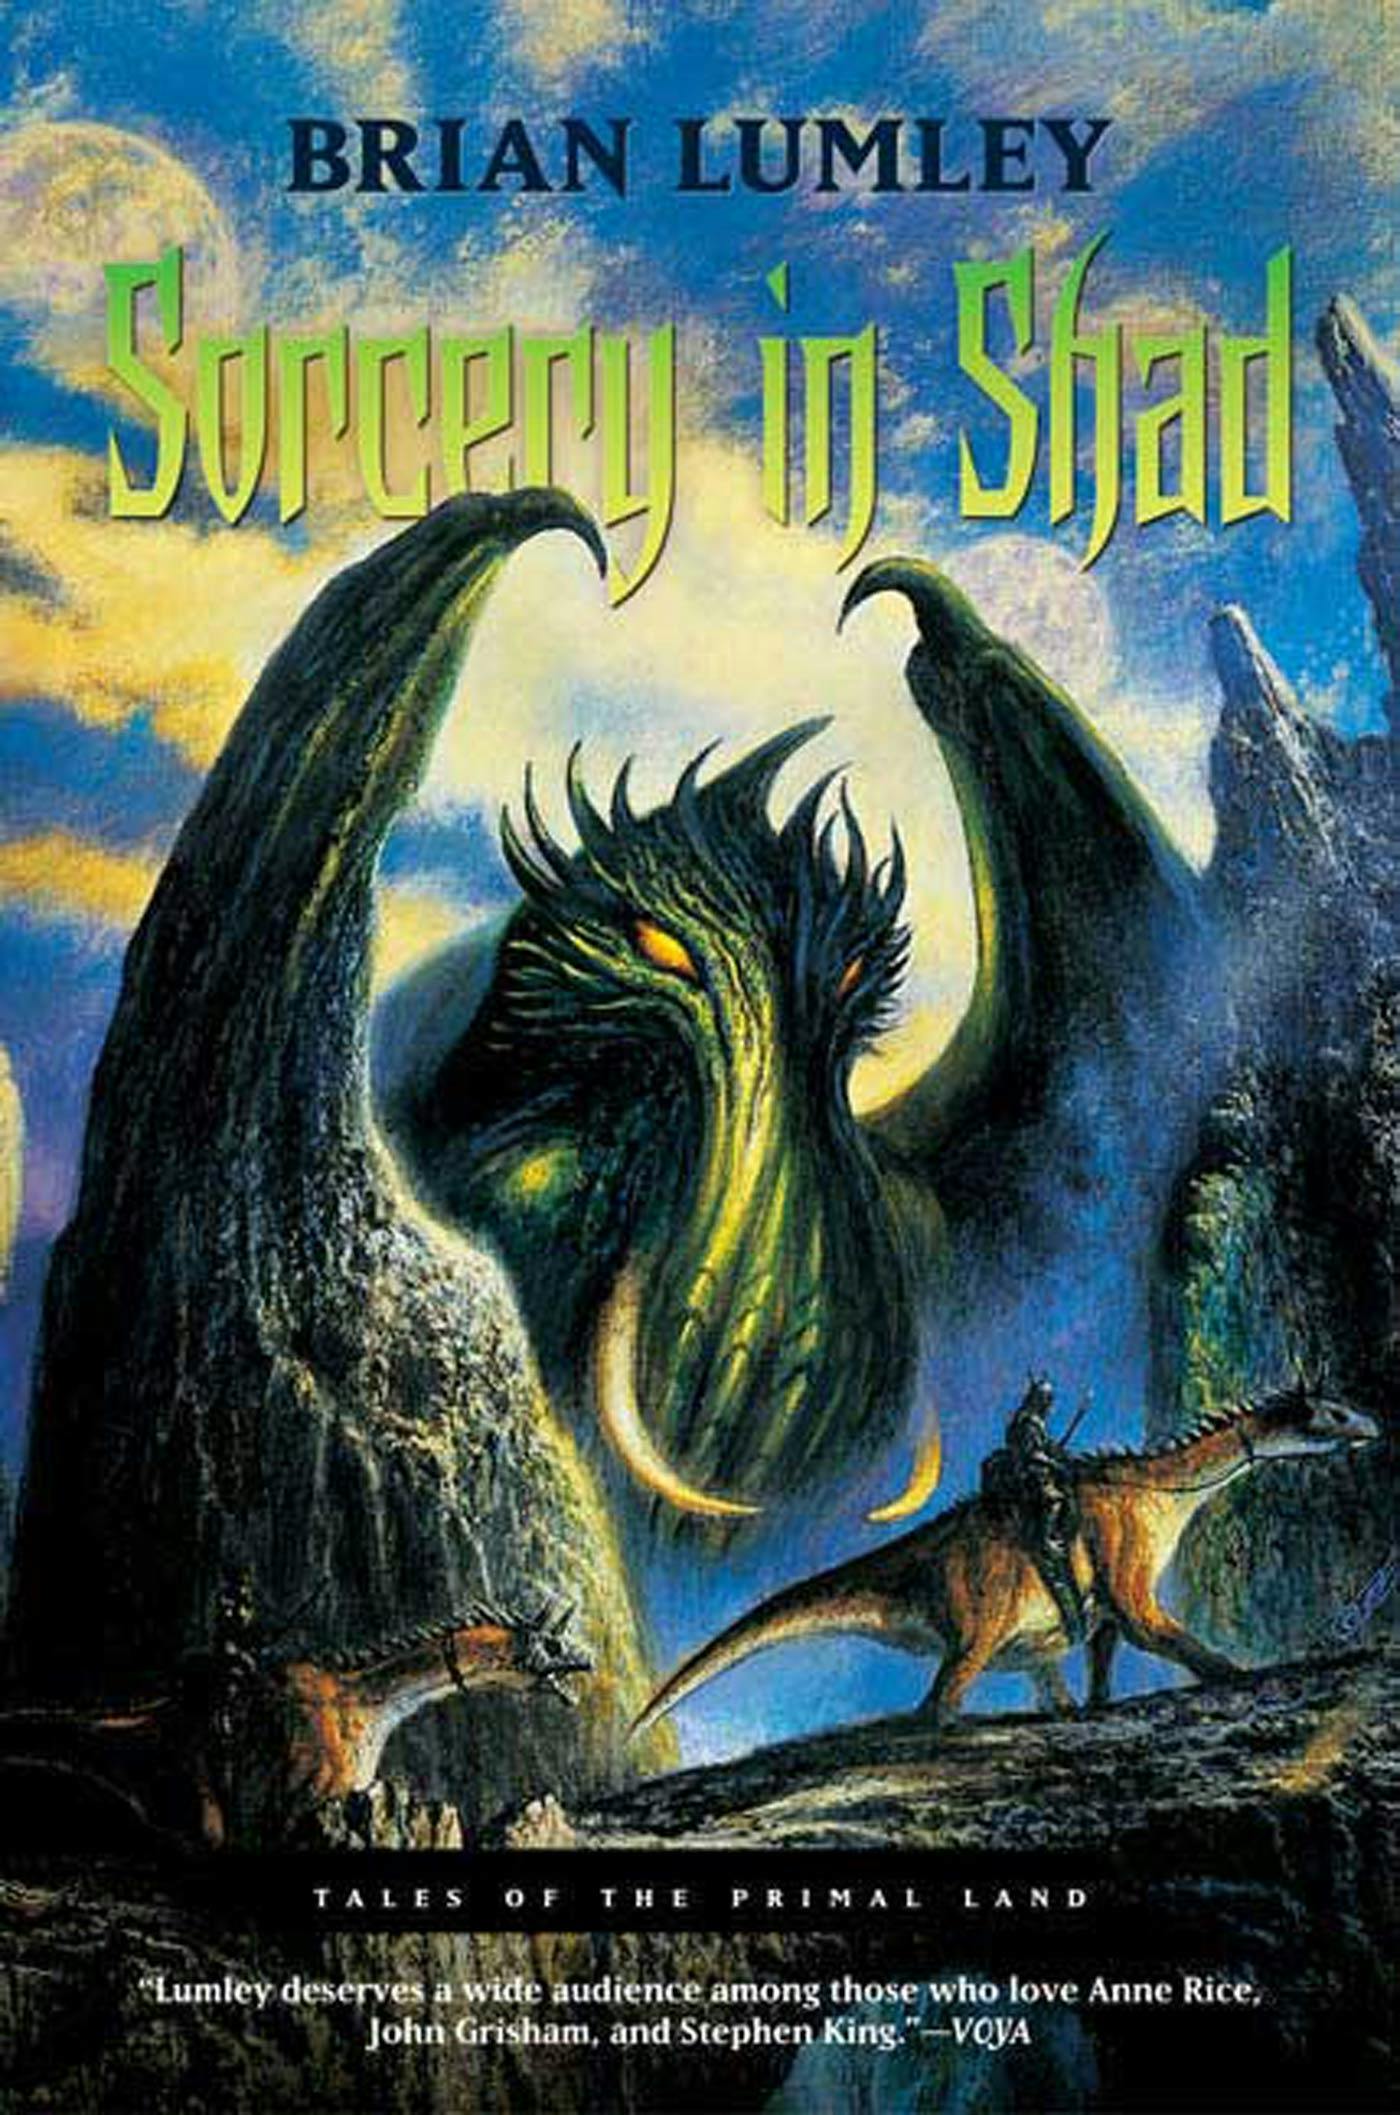 Cover for the book titled as: Sorcery in Shad